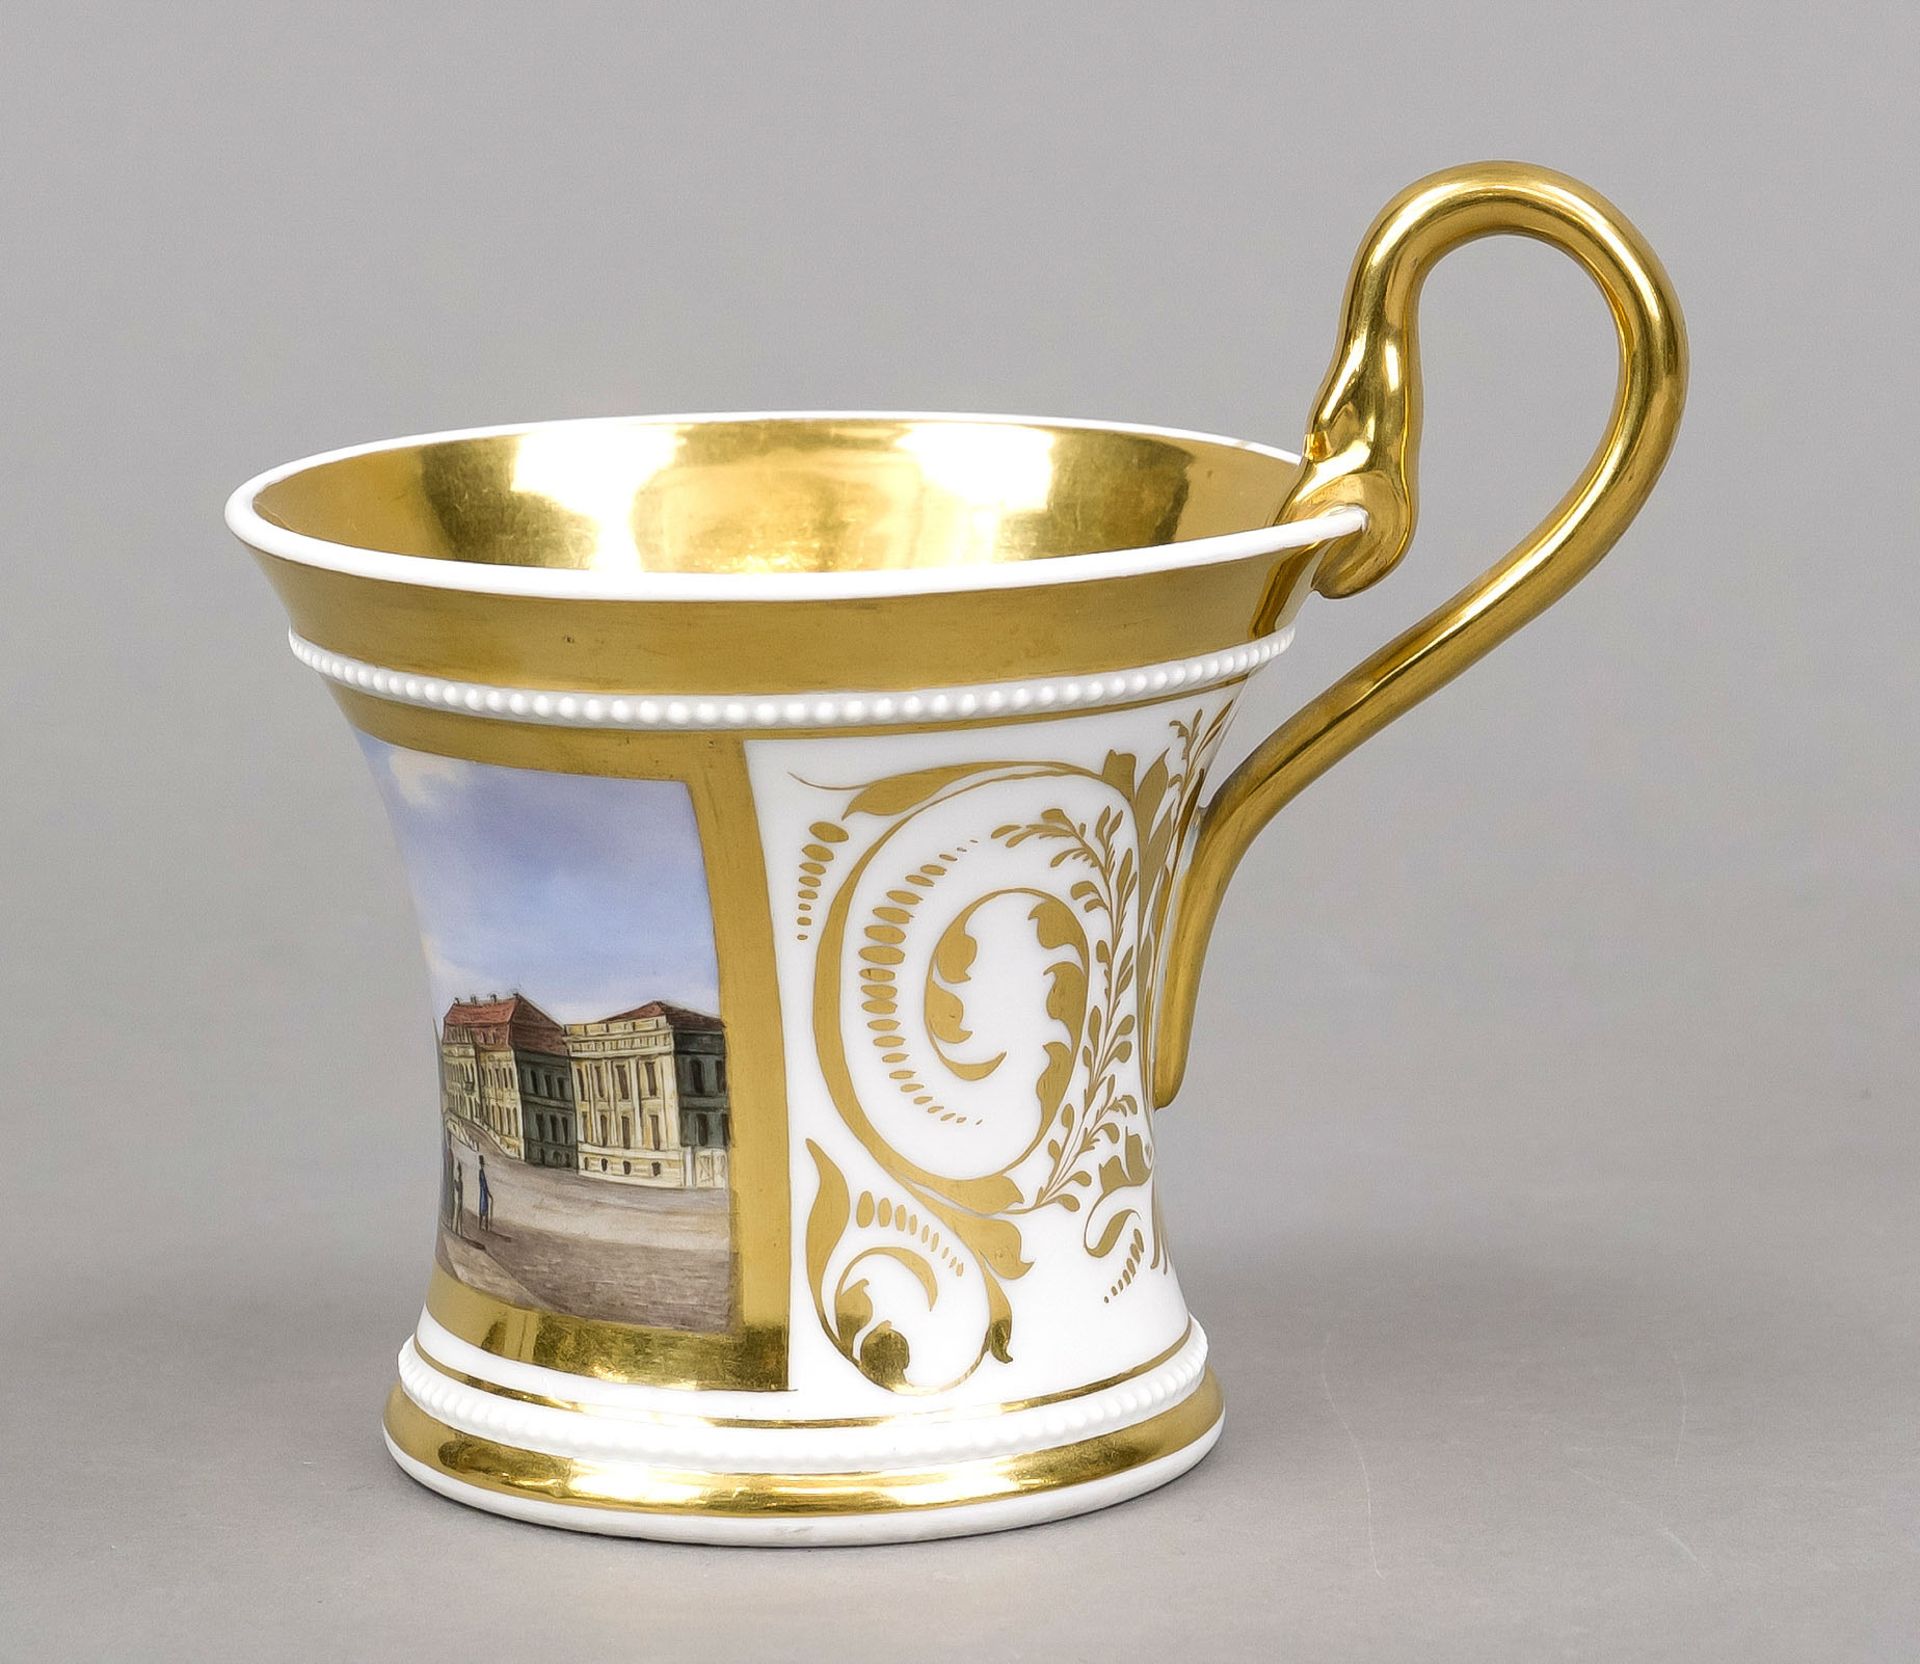 A Berlin view cup with saucer, KPM Berlin, marks 1800-1840, 1st choice, cup with red imperial orb - Image 2 of 2